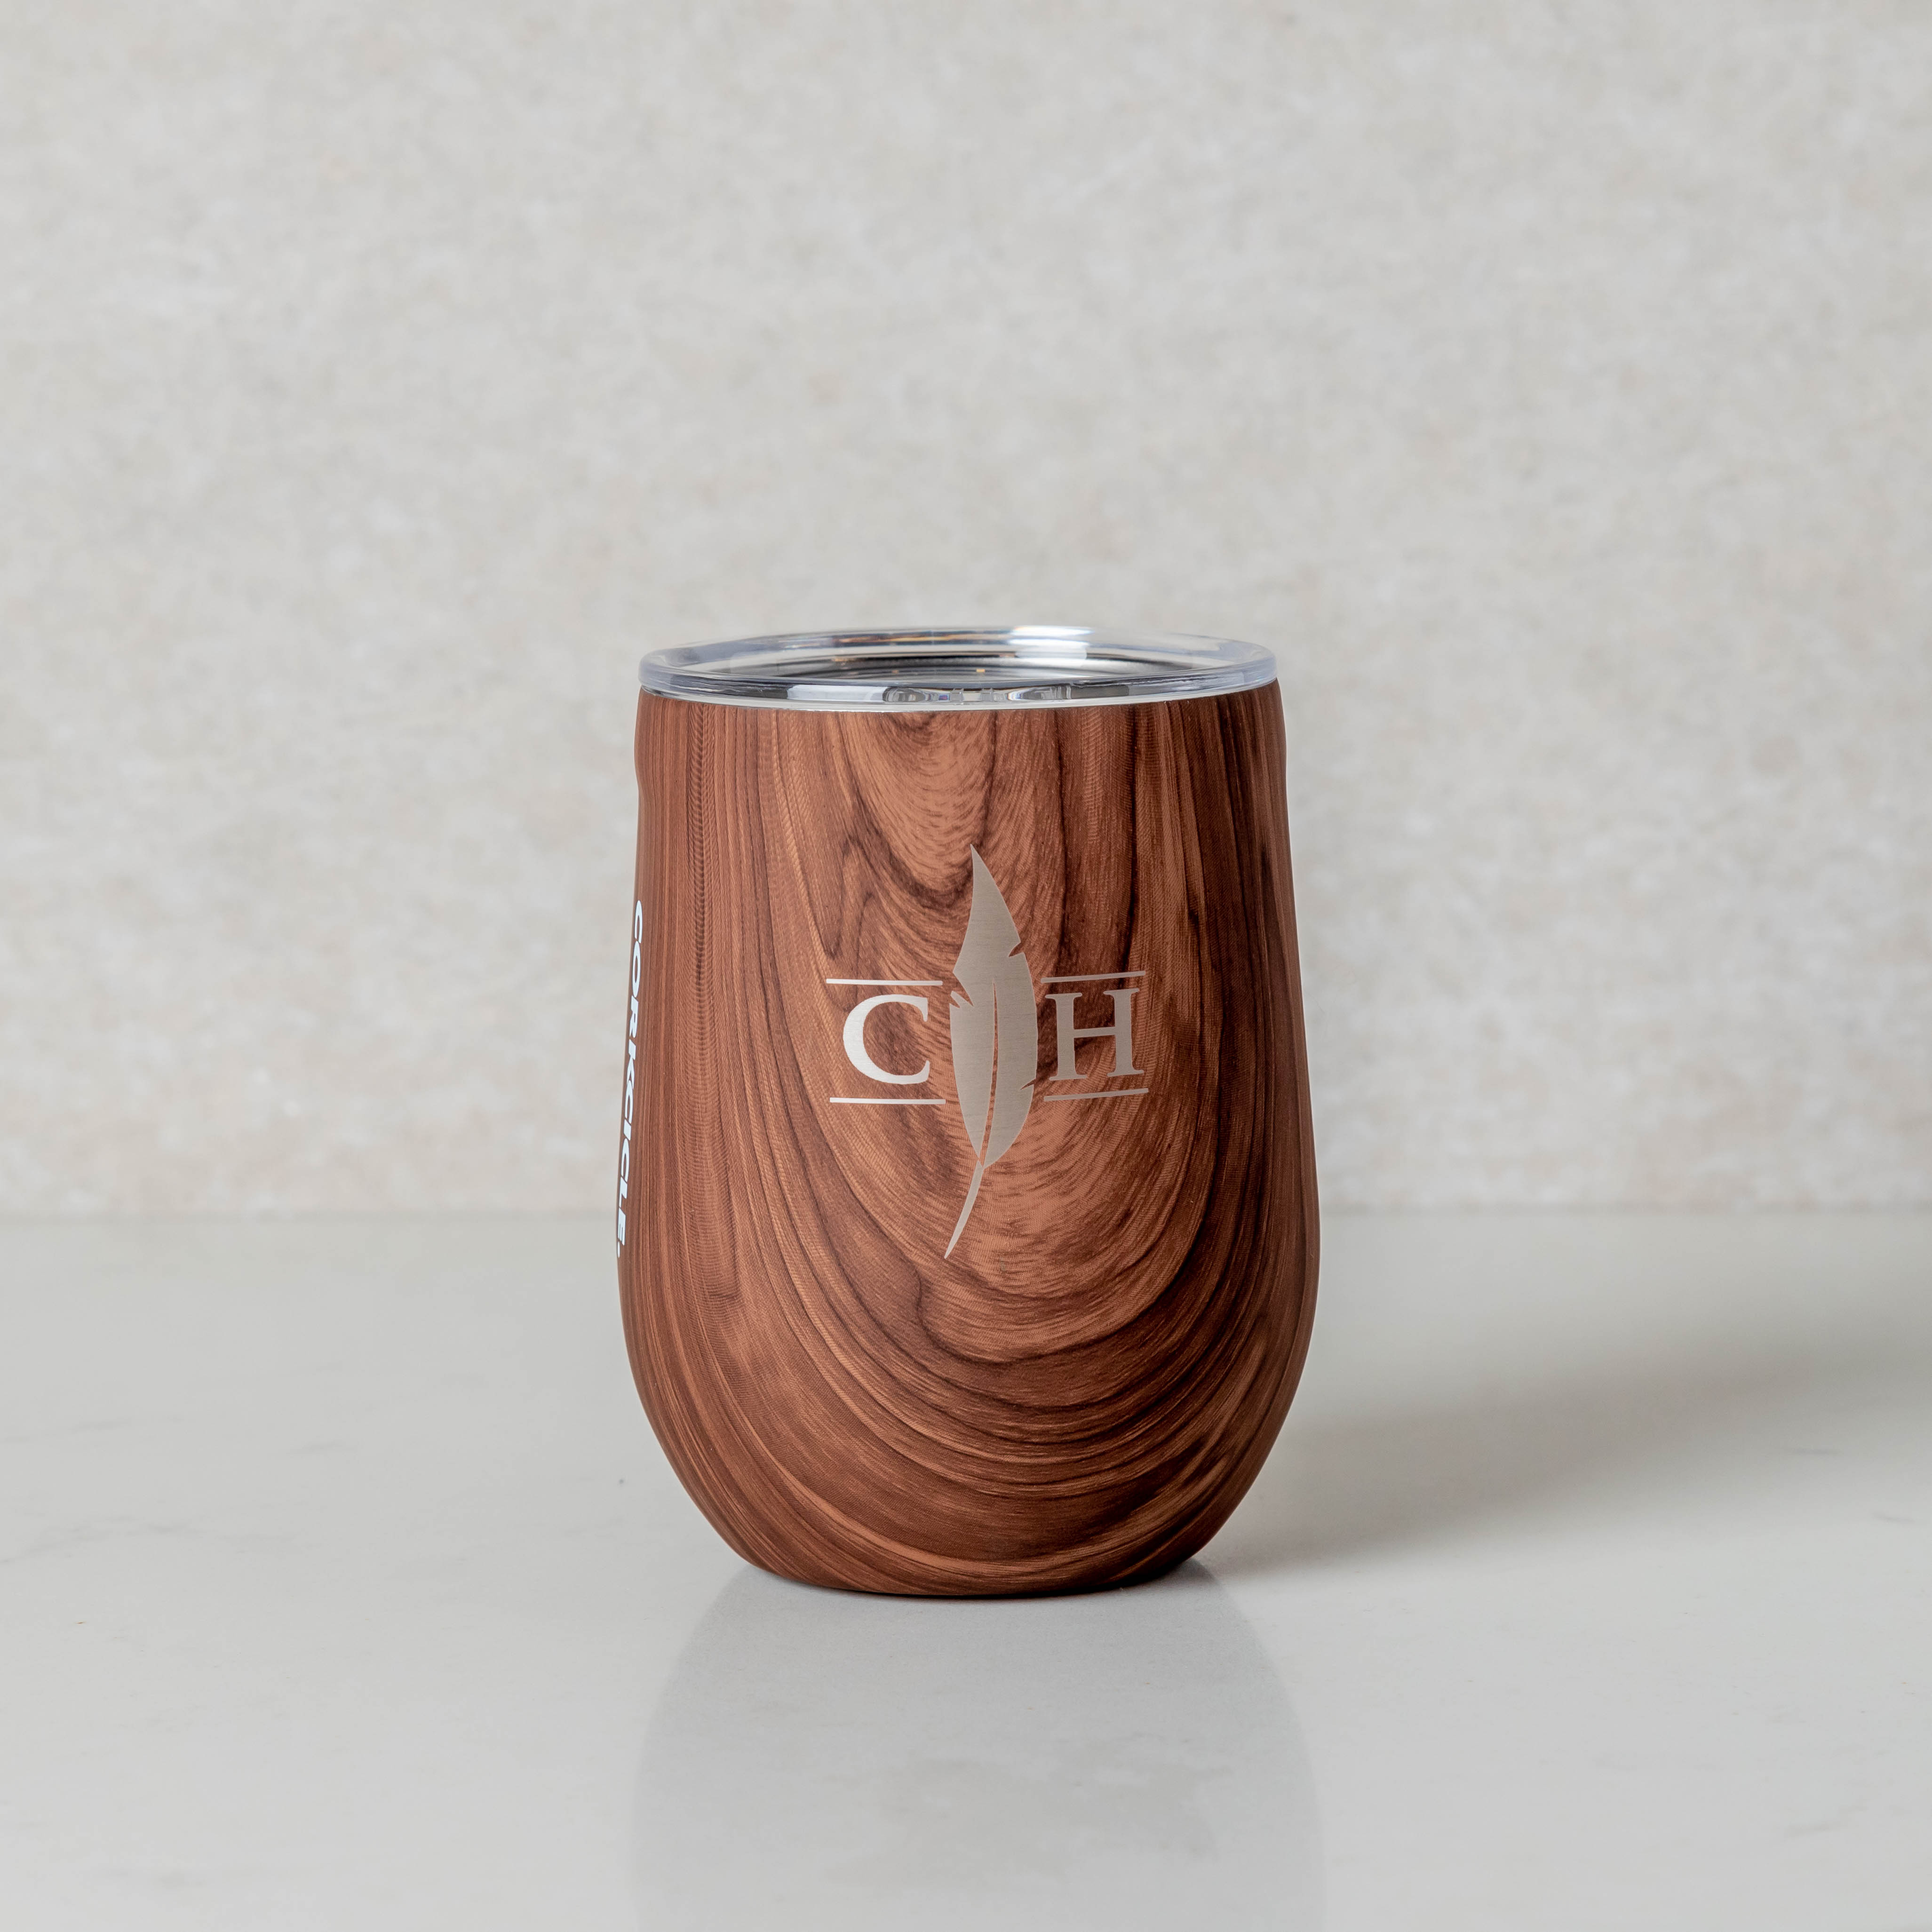 https://shop.coopershawkwinery.com/images/product/P/CH%20WALNUT%20STEMLESS.jpg